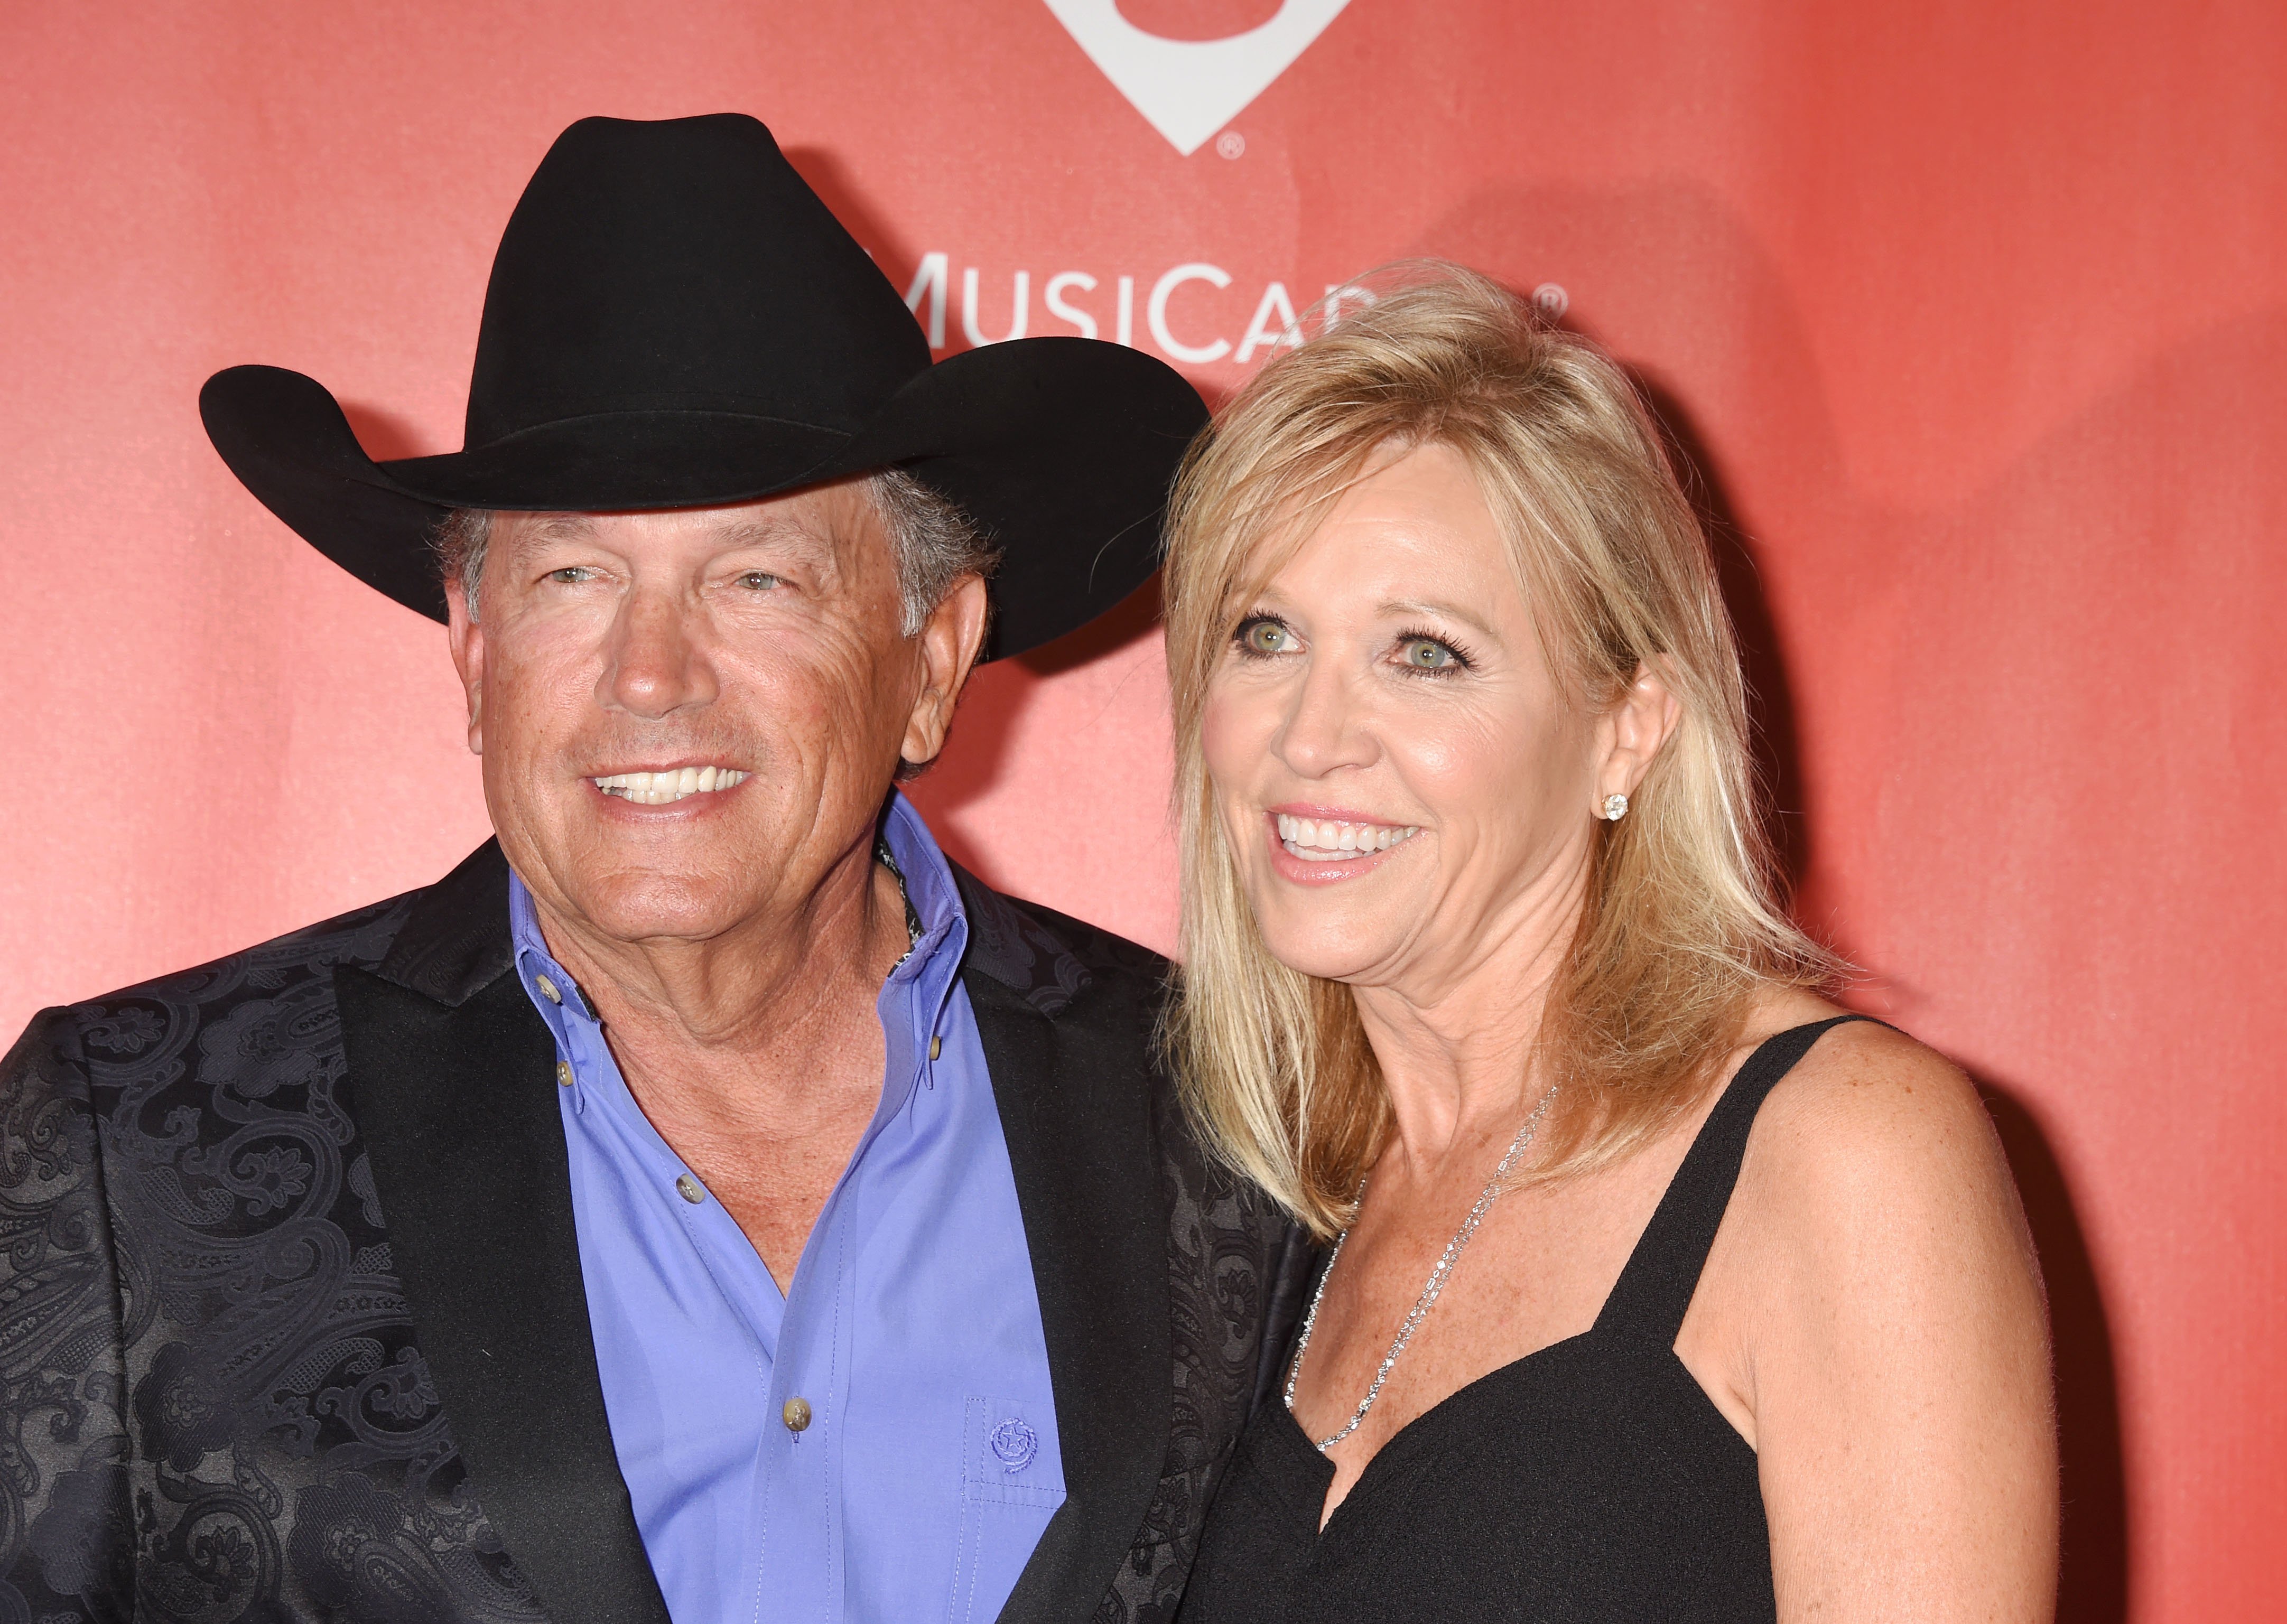 George and Norma Strait attend MusiCares Person of the Year honoring Tom Petty Los Angeles Convention Center on February 10, 2017, in Los Angeles, California. | Source: Getty Images